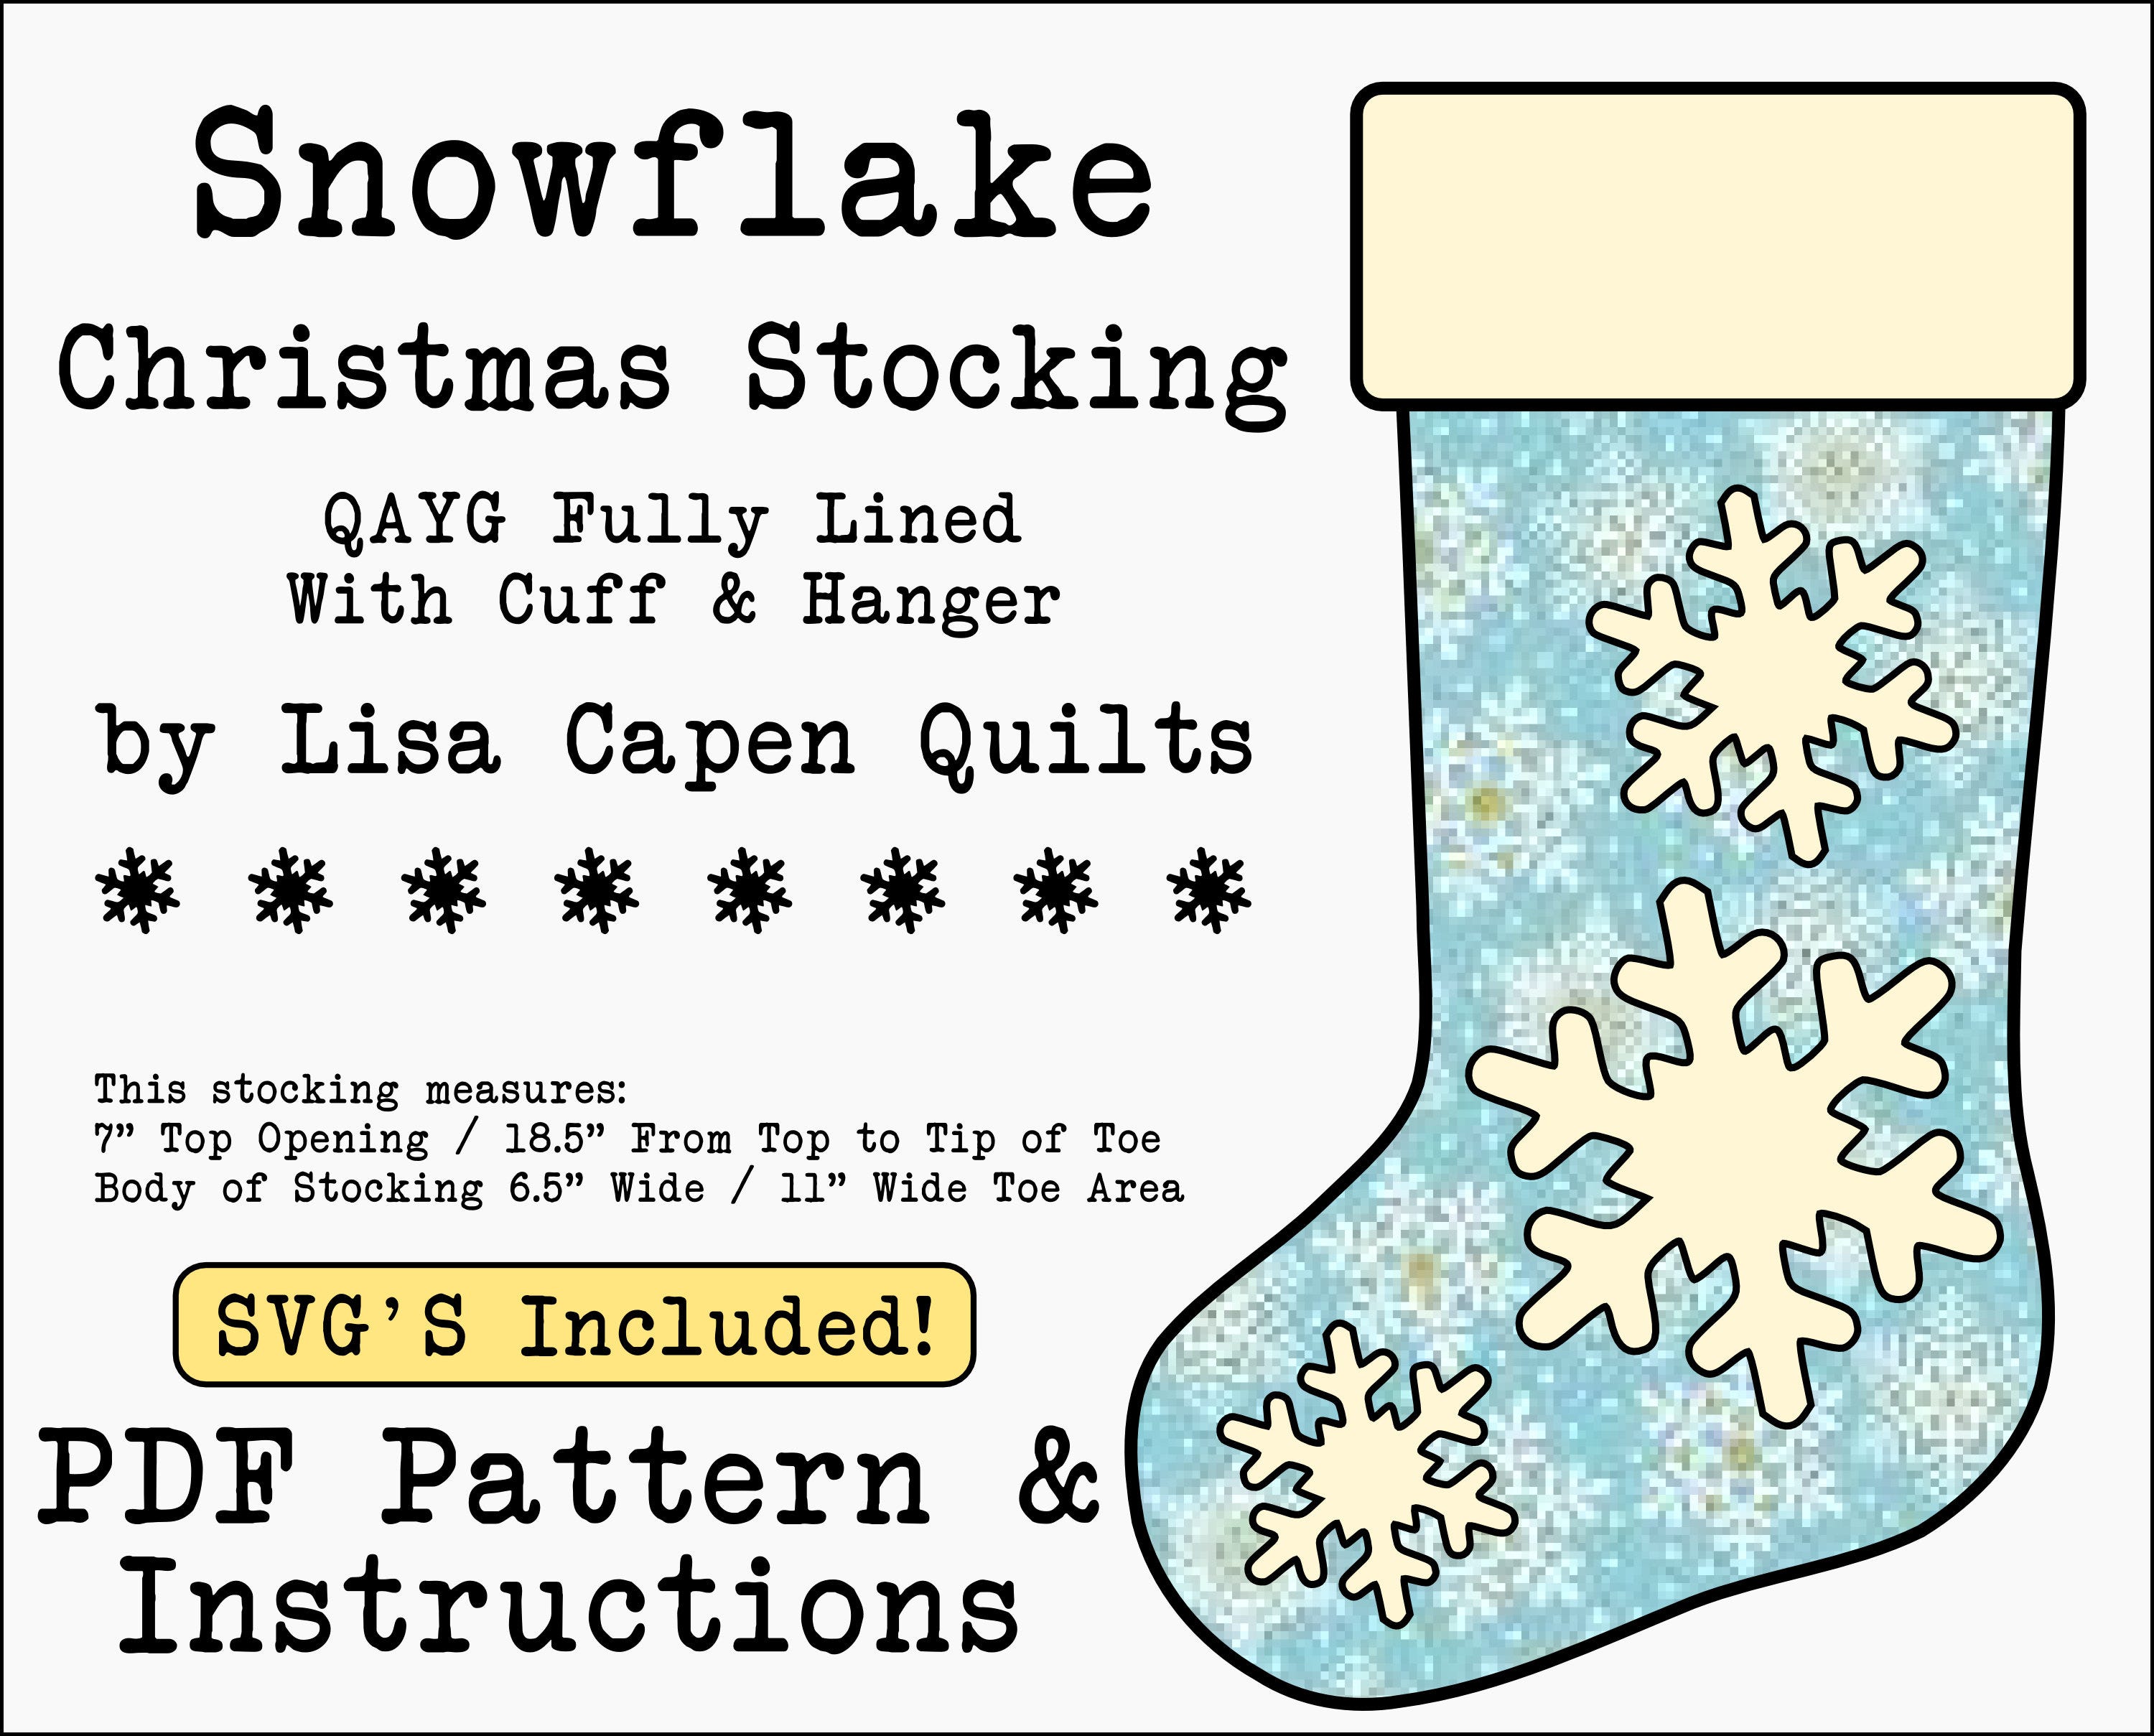 Snowflake Quilted Christmas Stocking Pattern - SVGs Included - Applique Templates Included - QAYG - Instant PDF - 7" x 18.5" by LCQ